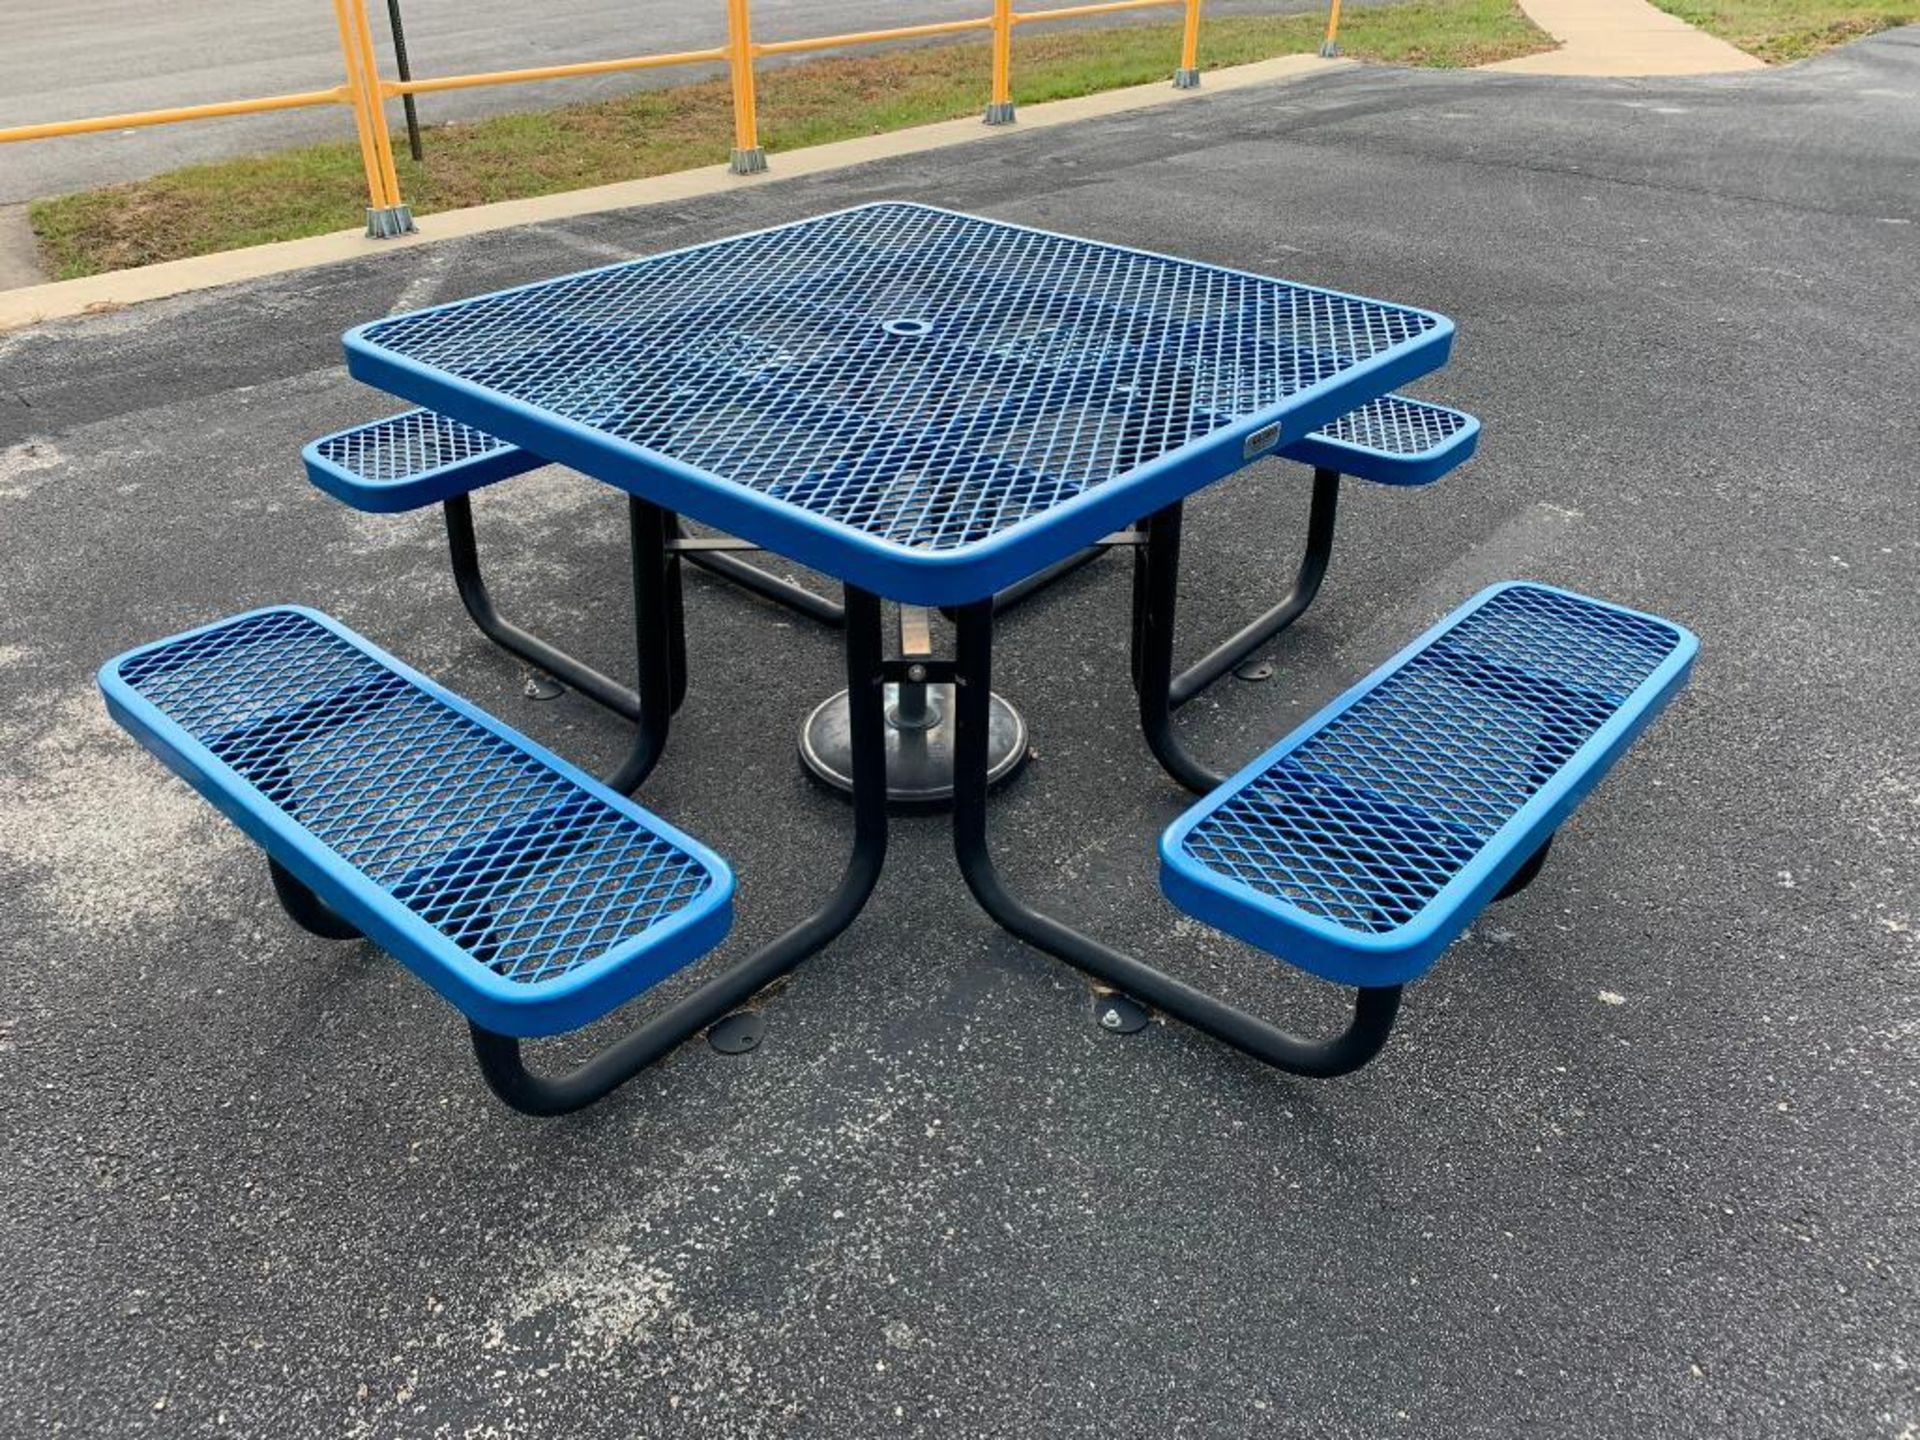 (8x) Global Square Outdoor Tables - Image 2 of 6